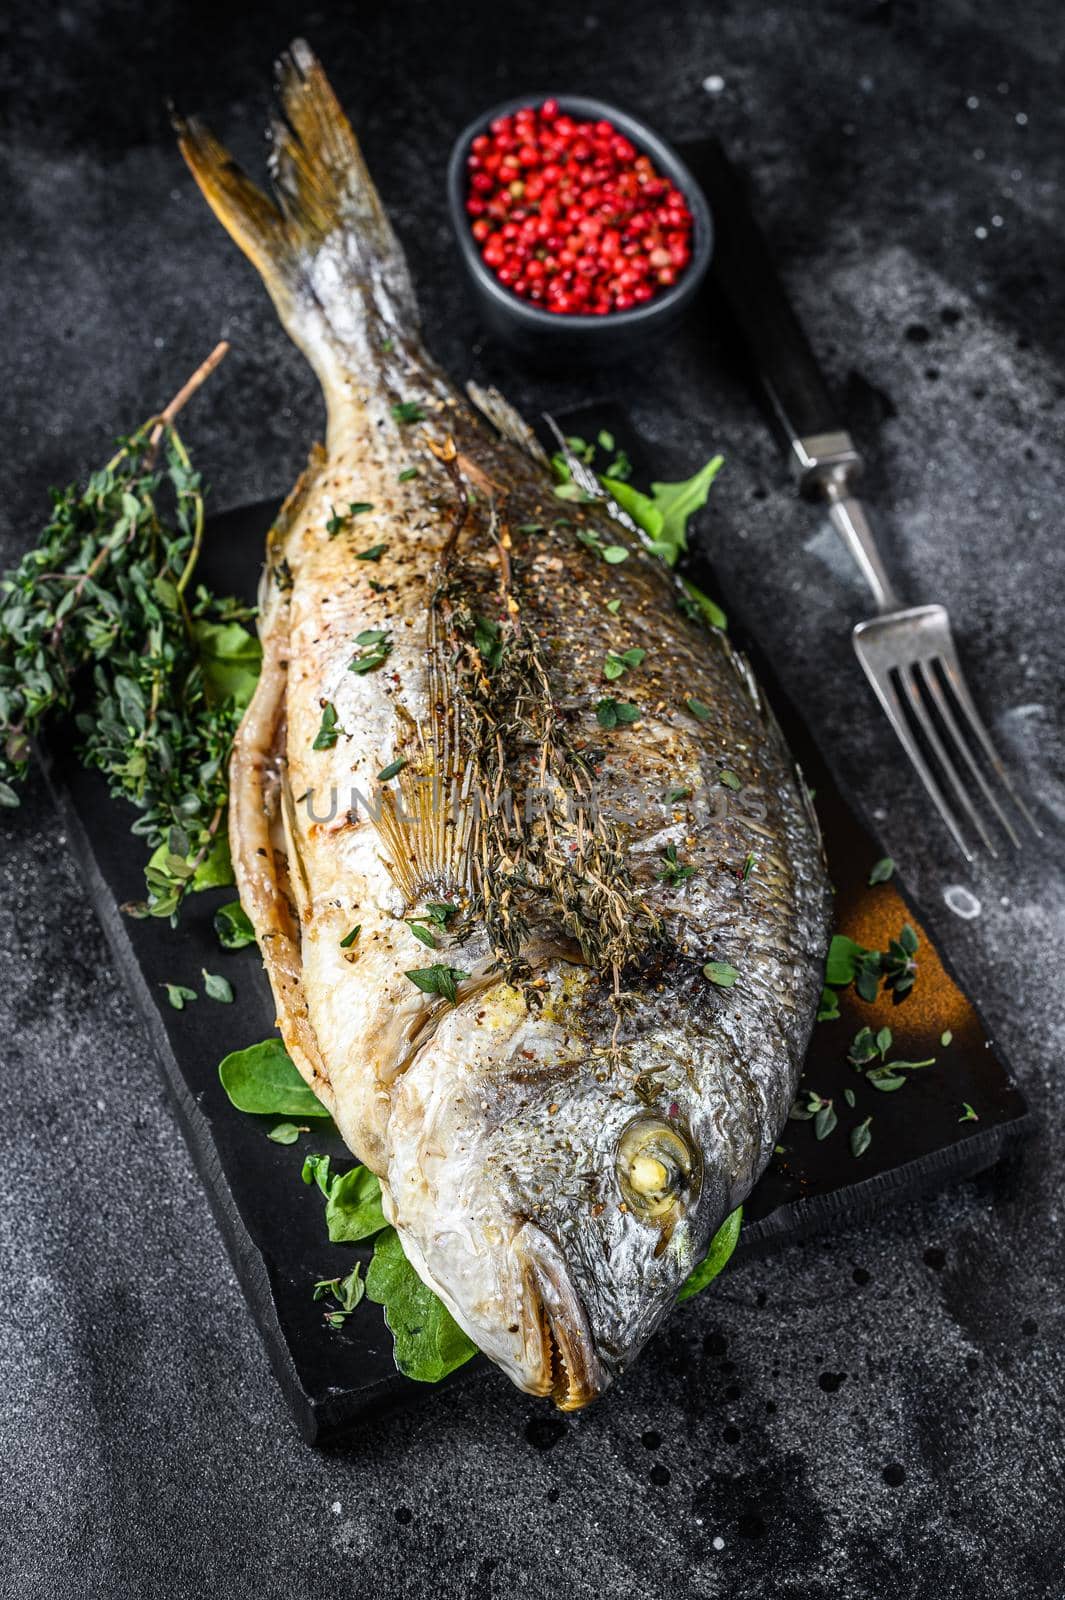 Roasted sea bream fish with herbs on a cutting board. Black background. Top view by Composter